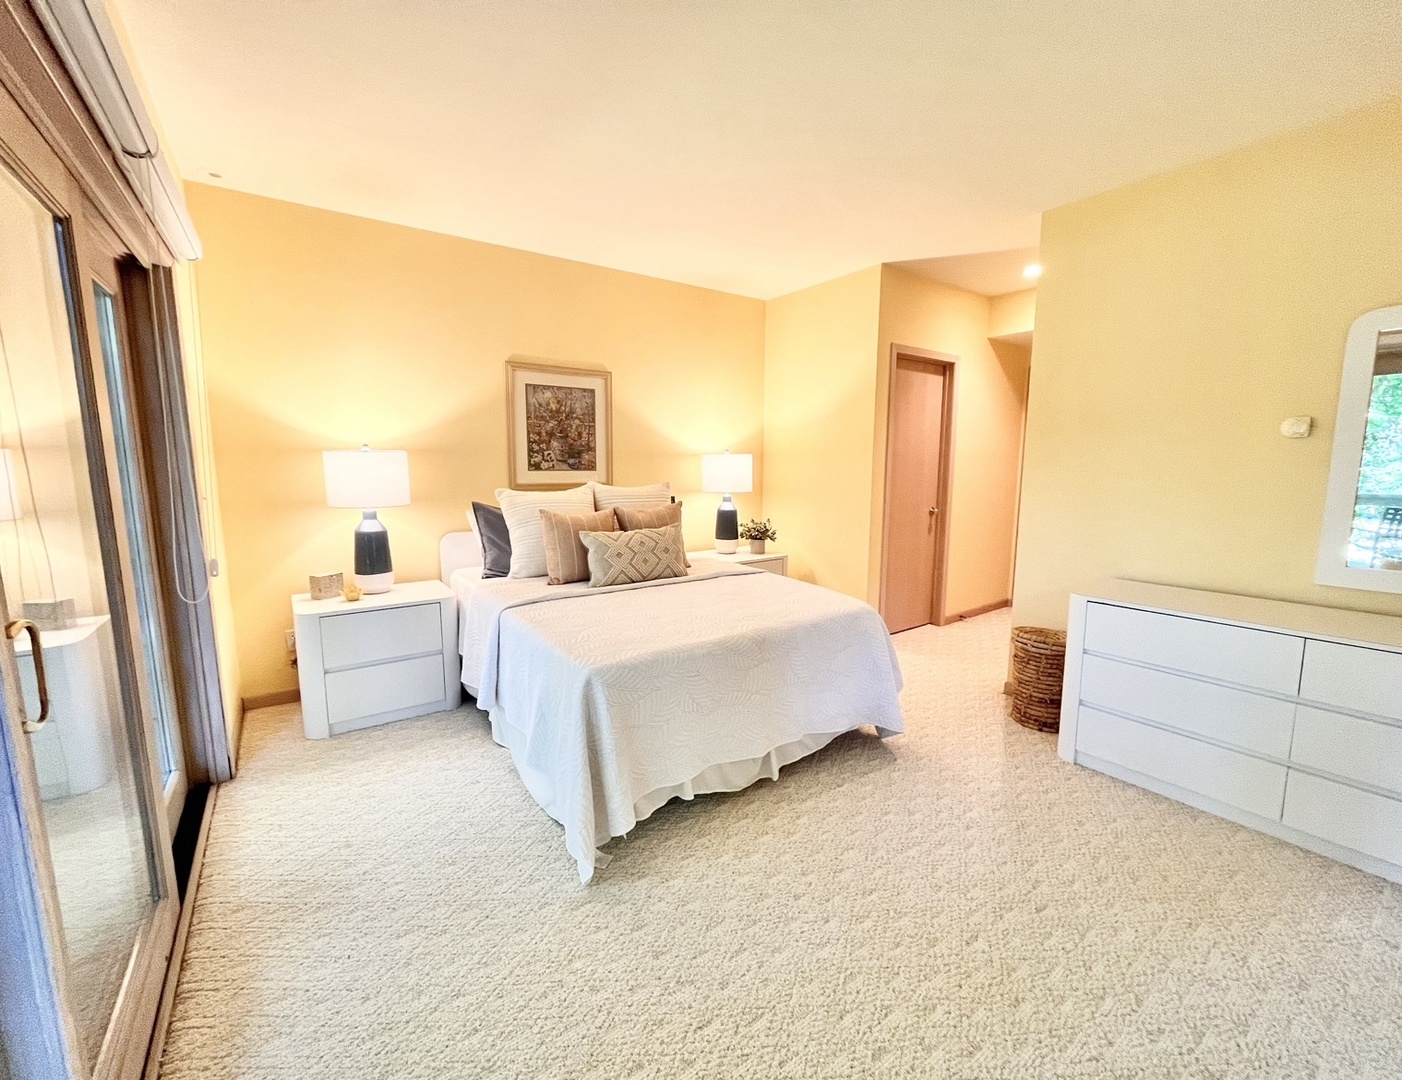 The 3rd of 3 walk-out lower-level queen bedrooms, with access to the Jack & Jill bath